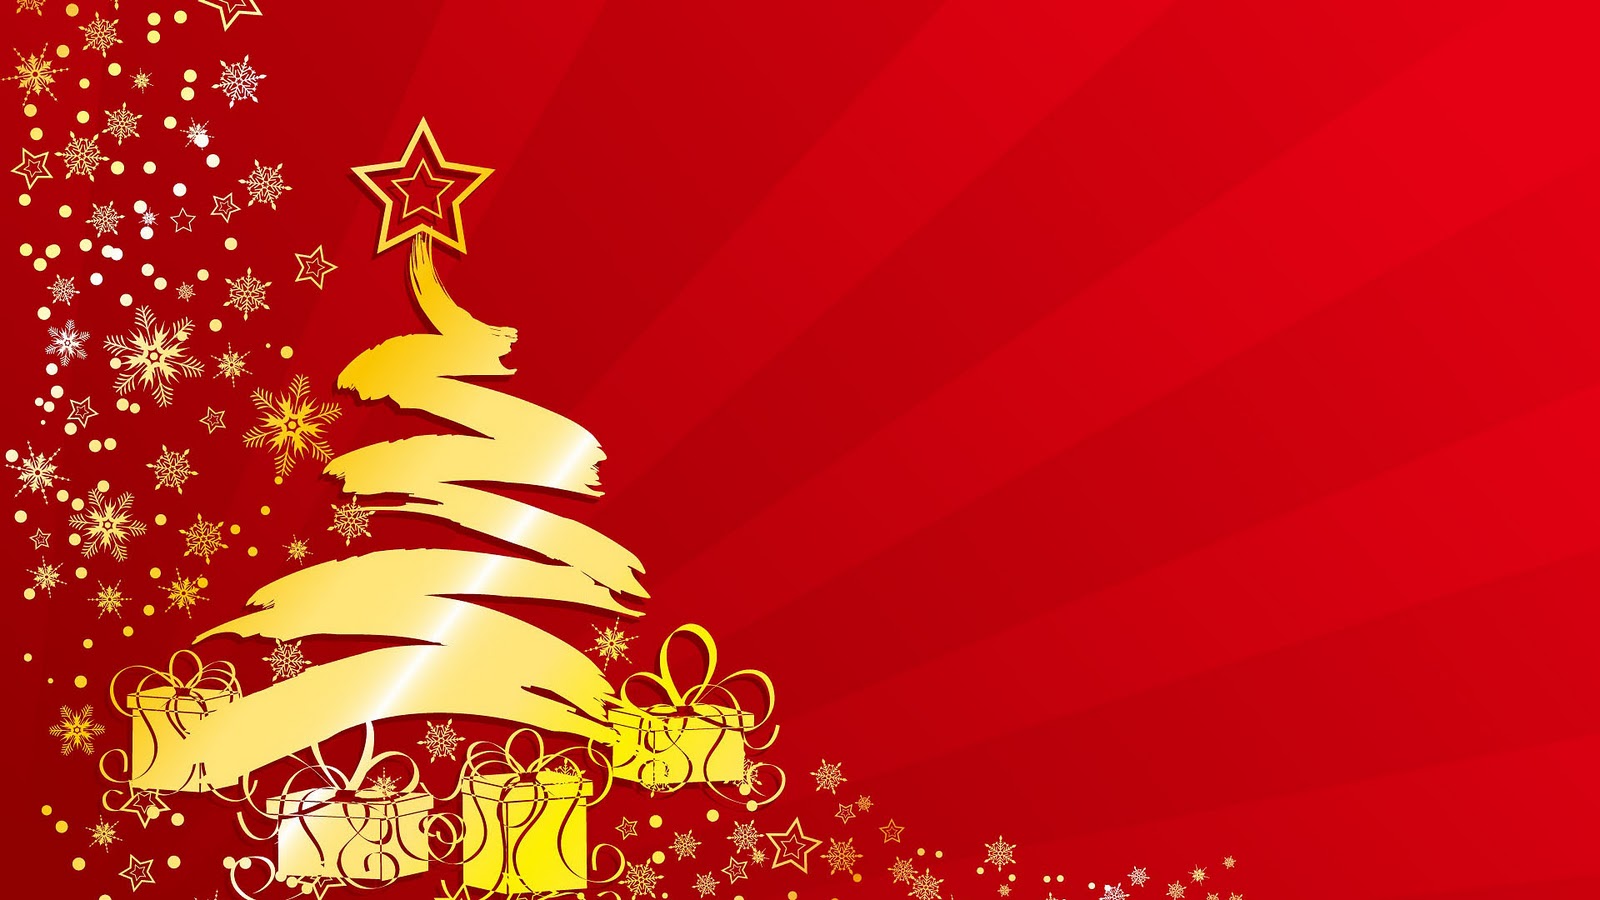 Christmas Background Images Wallpapers9